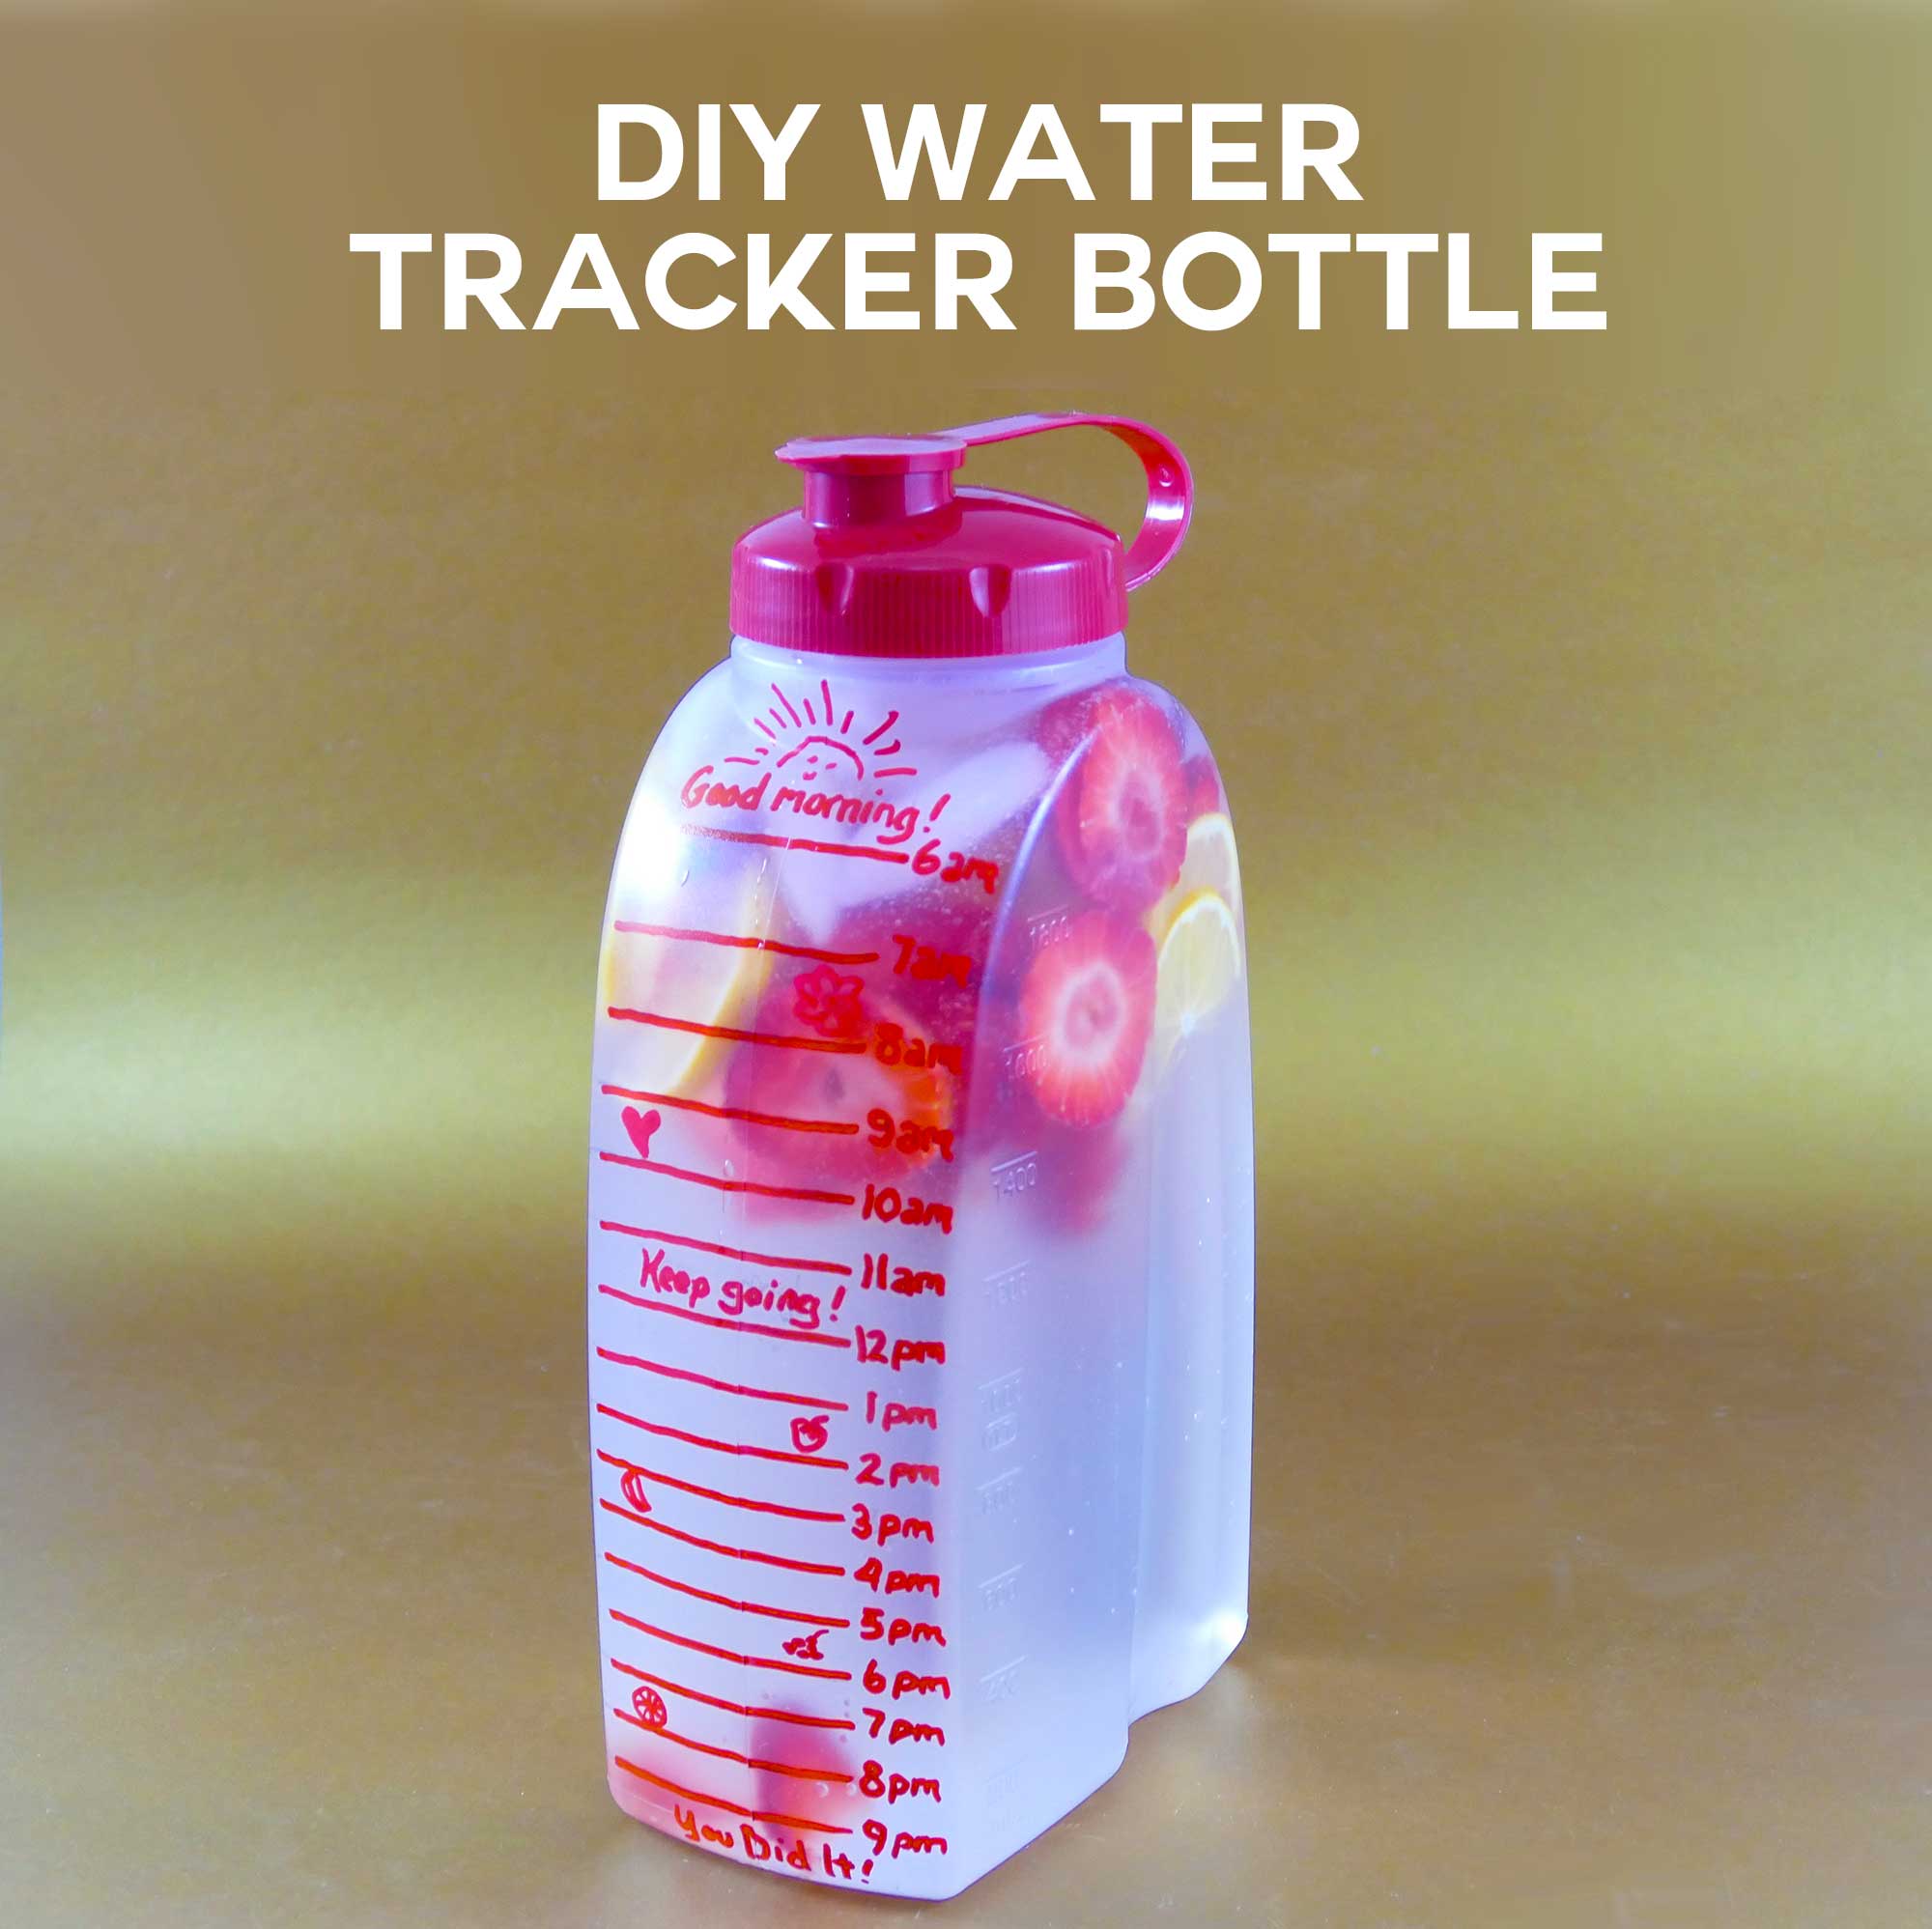 DIY Water Tracker Bottle Can Help You Lose Weight!